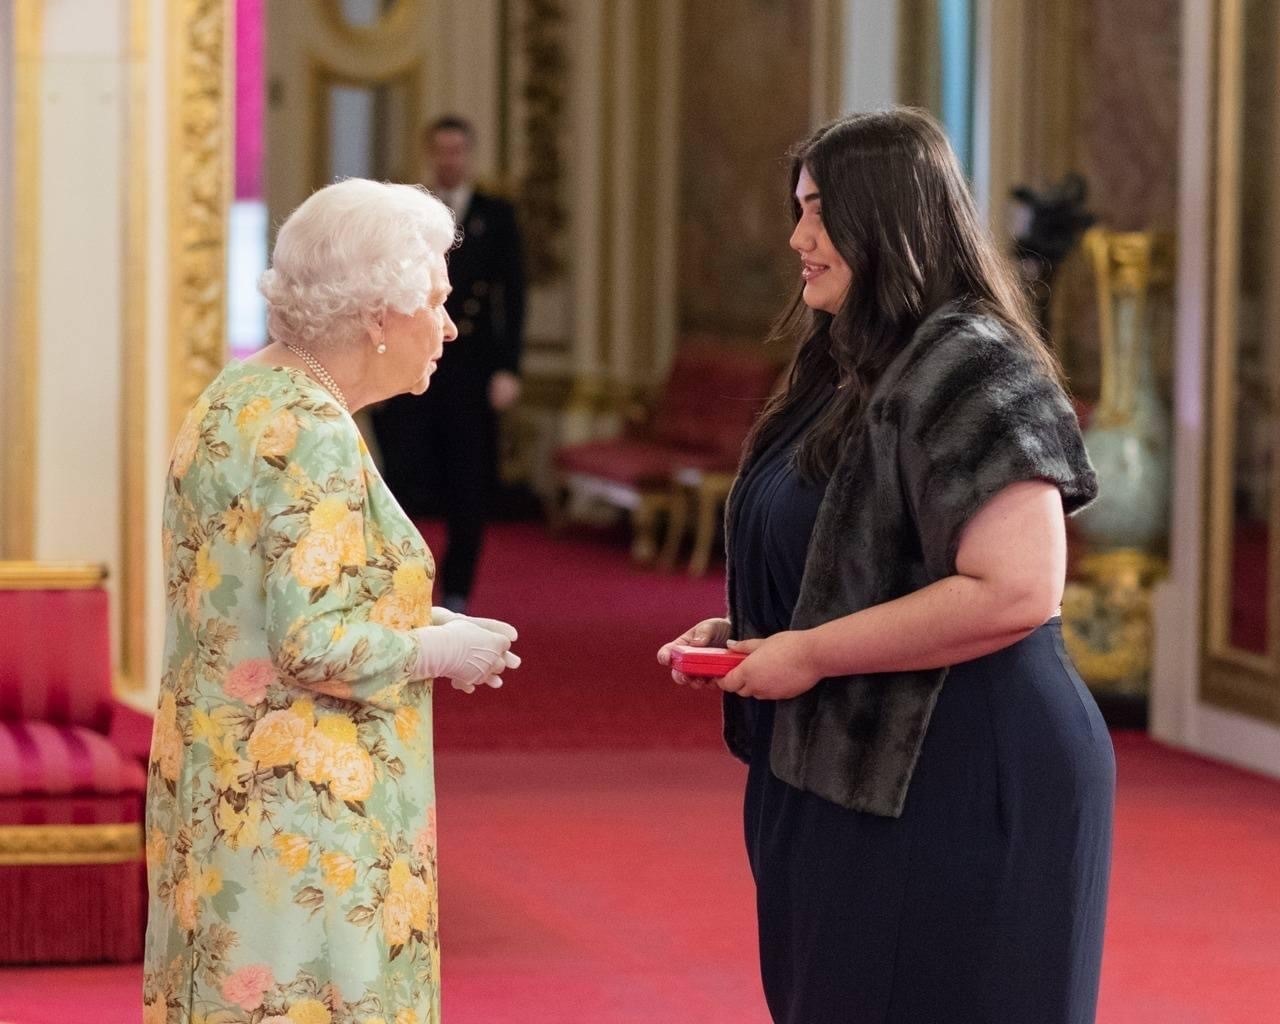 The Queen presents an award to a woman in a black dress.